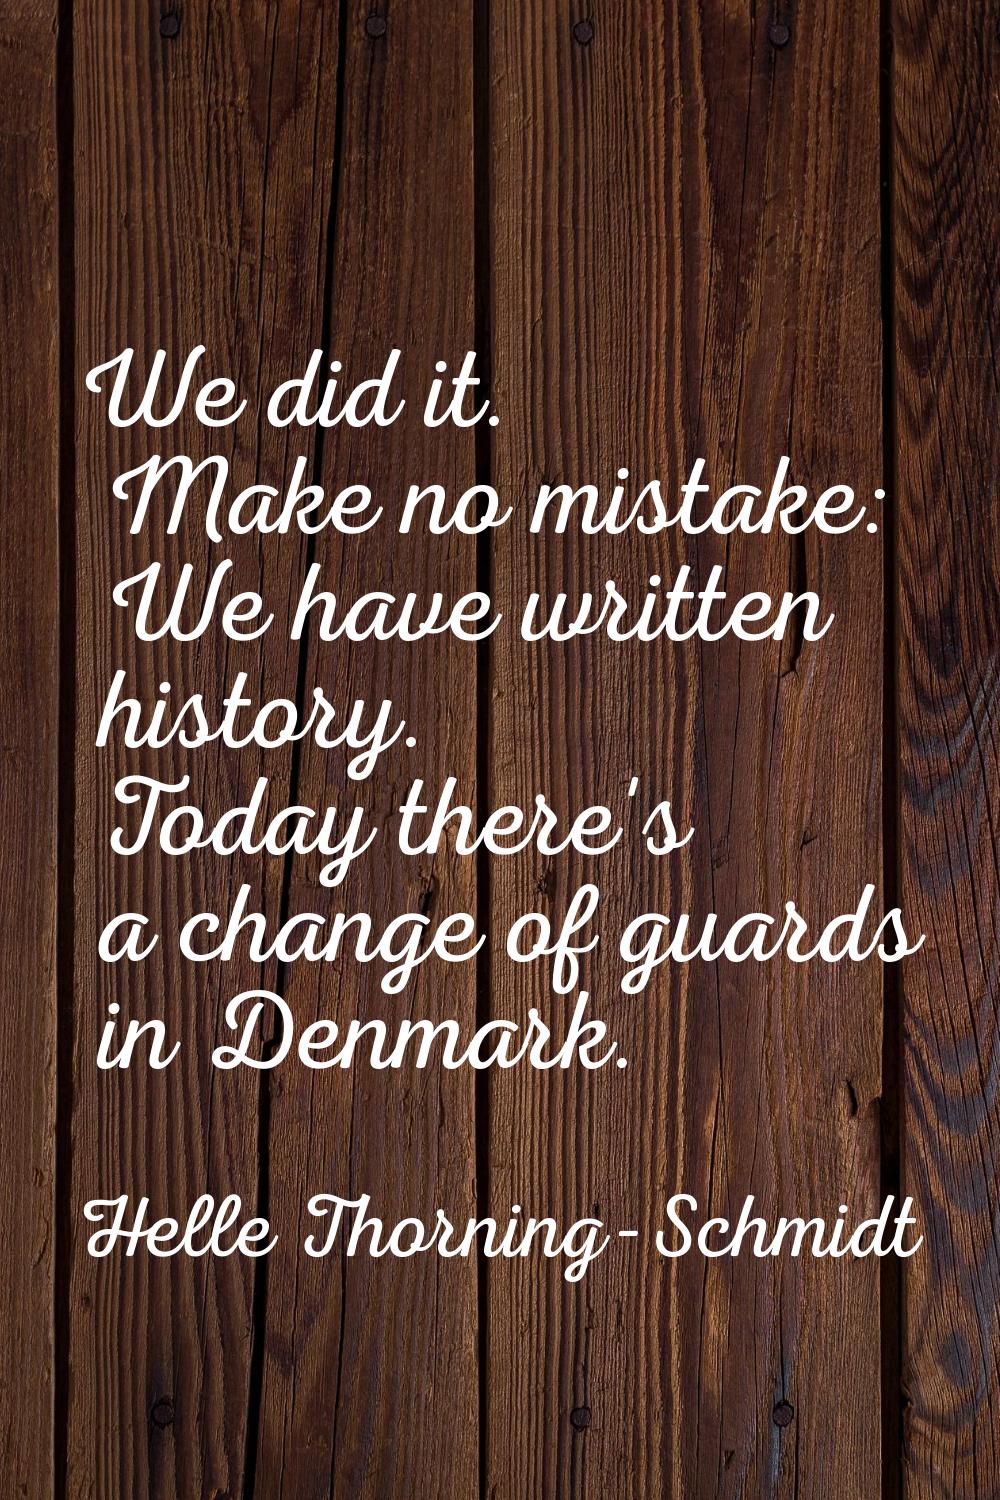 We did it. Make no mistake: We have written history. Today there's a change of guards in Denmark.